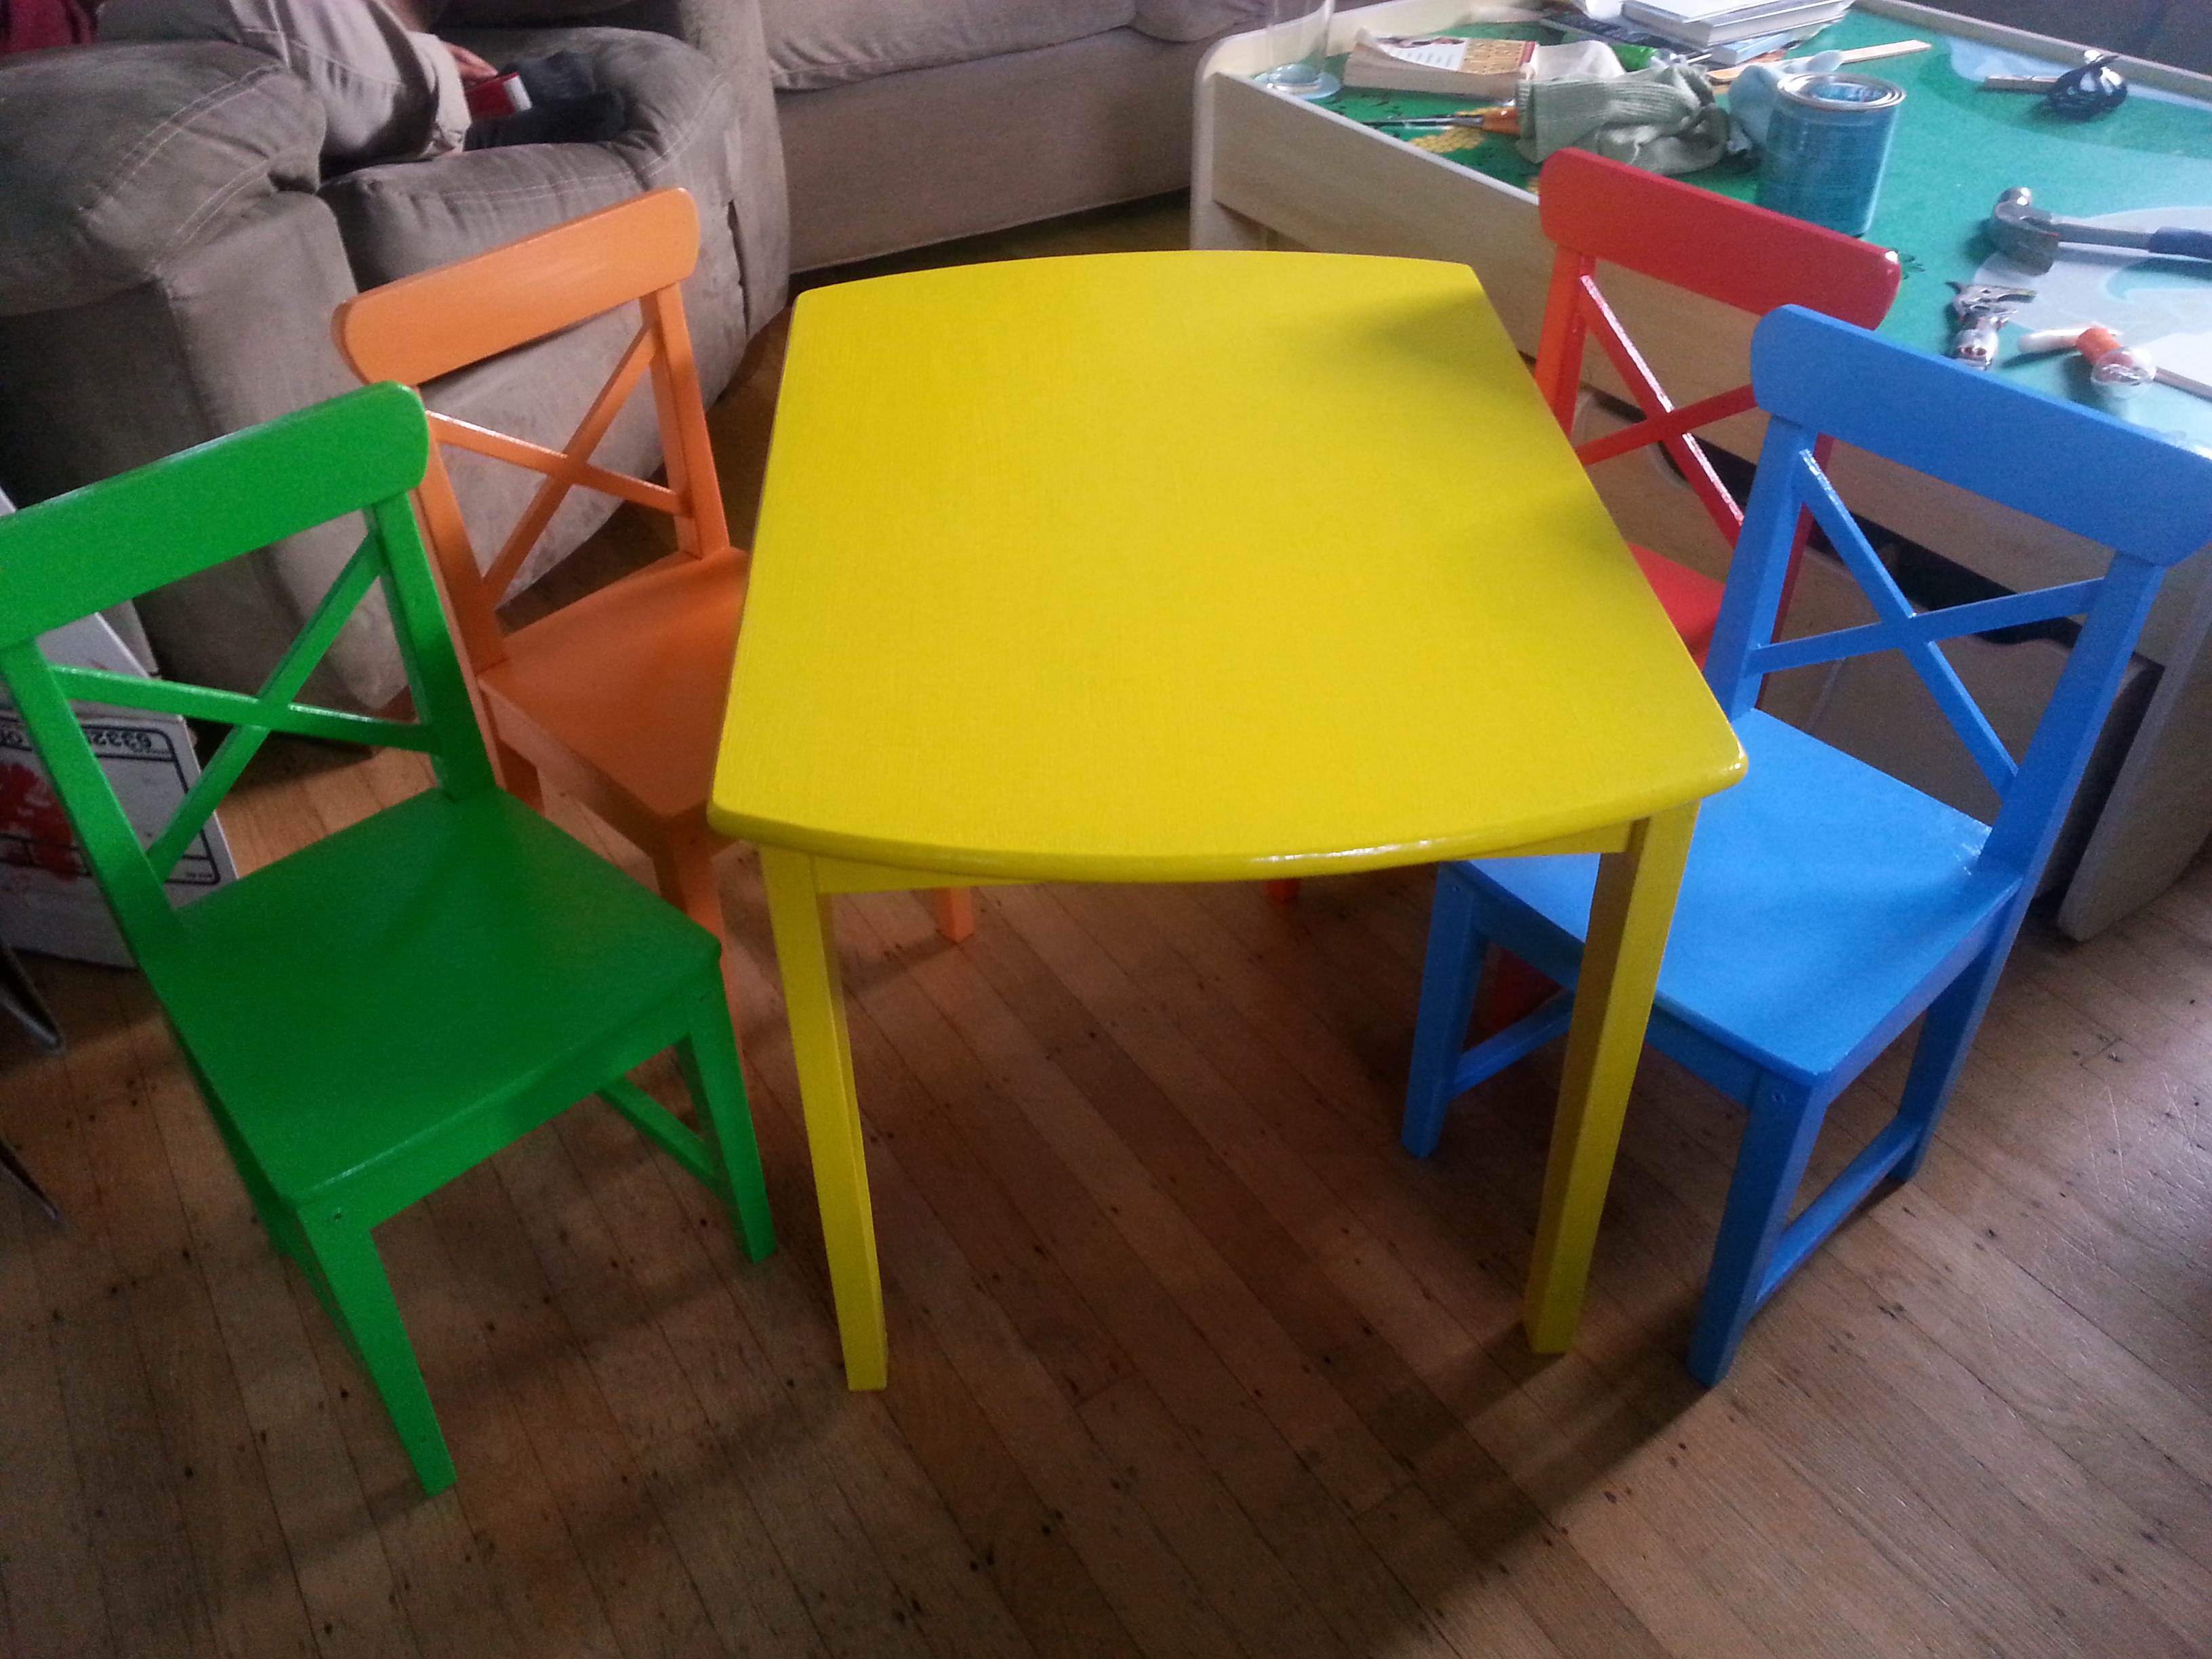 home bargains childs table and chairs